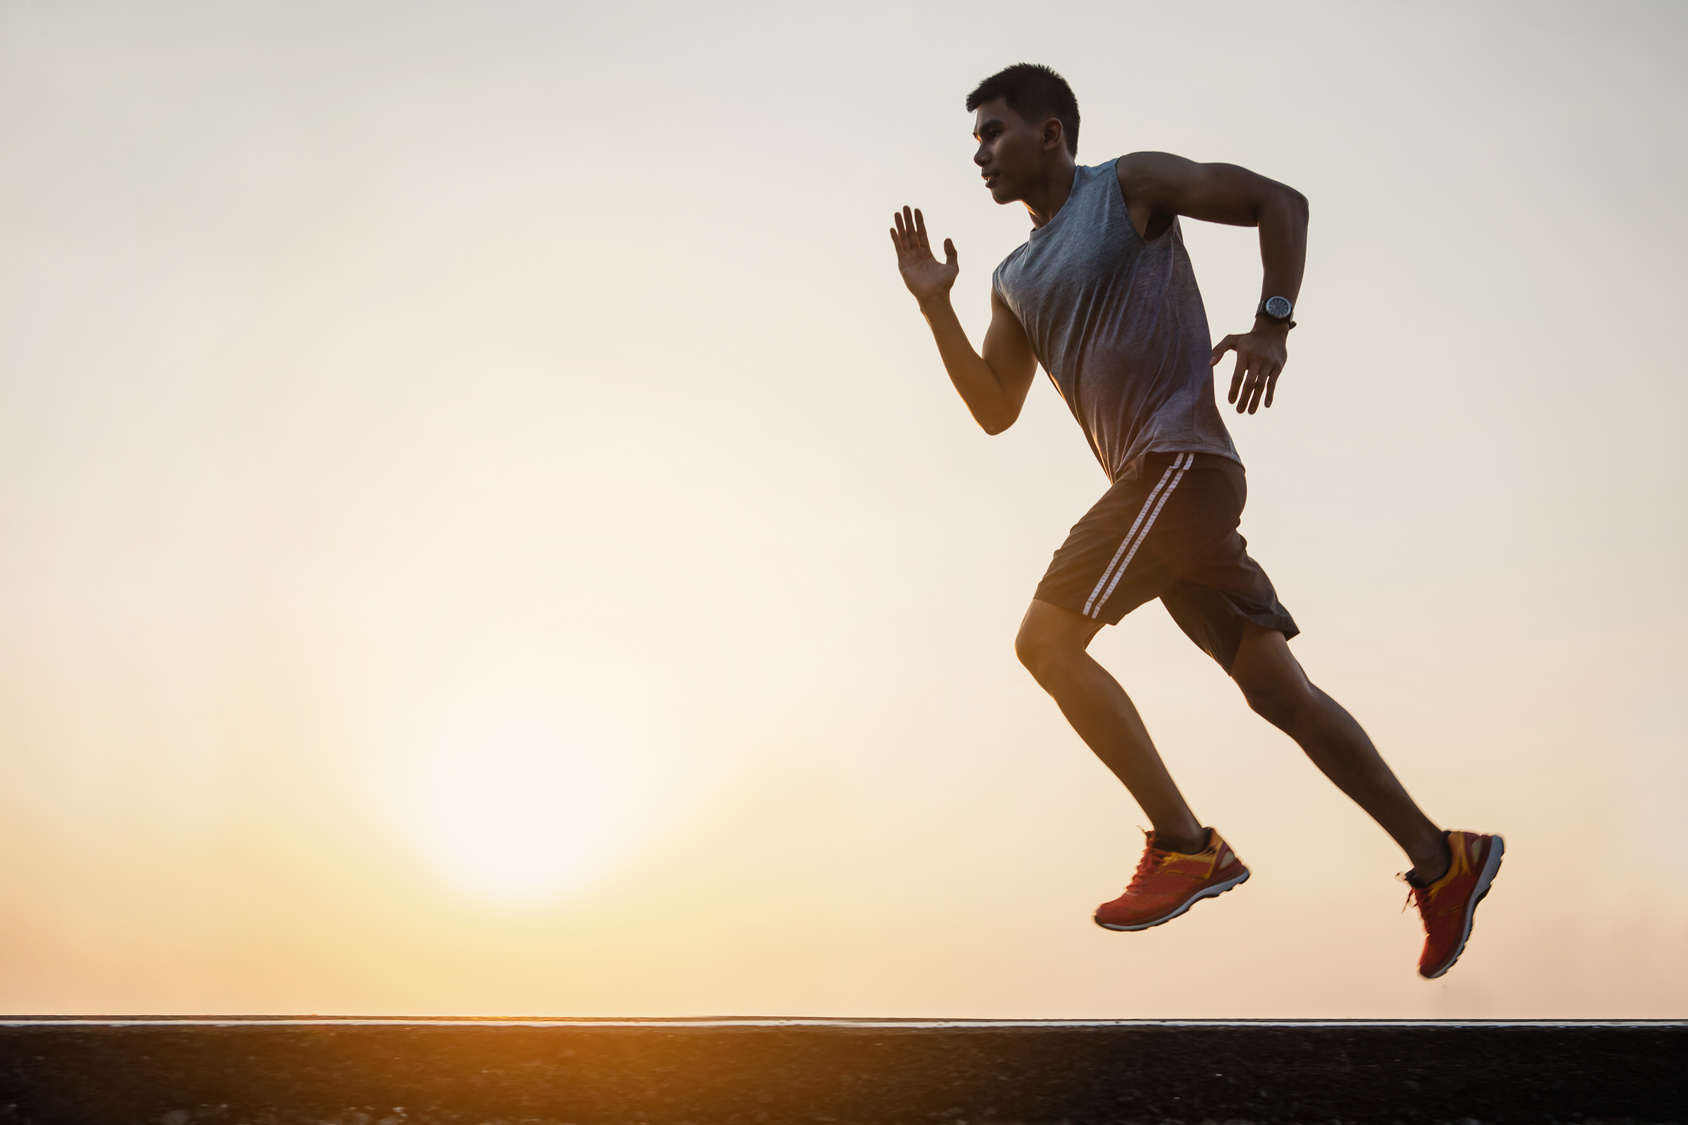 How to Increase Running Speed: 8 Expert Tips